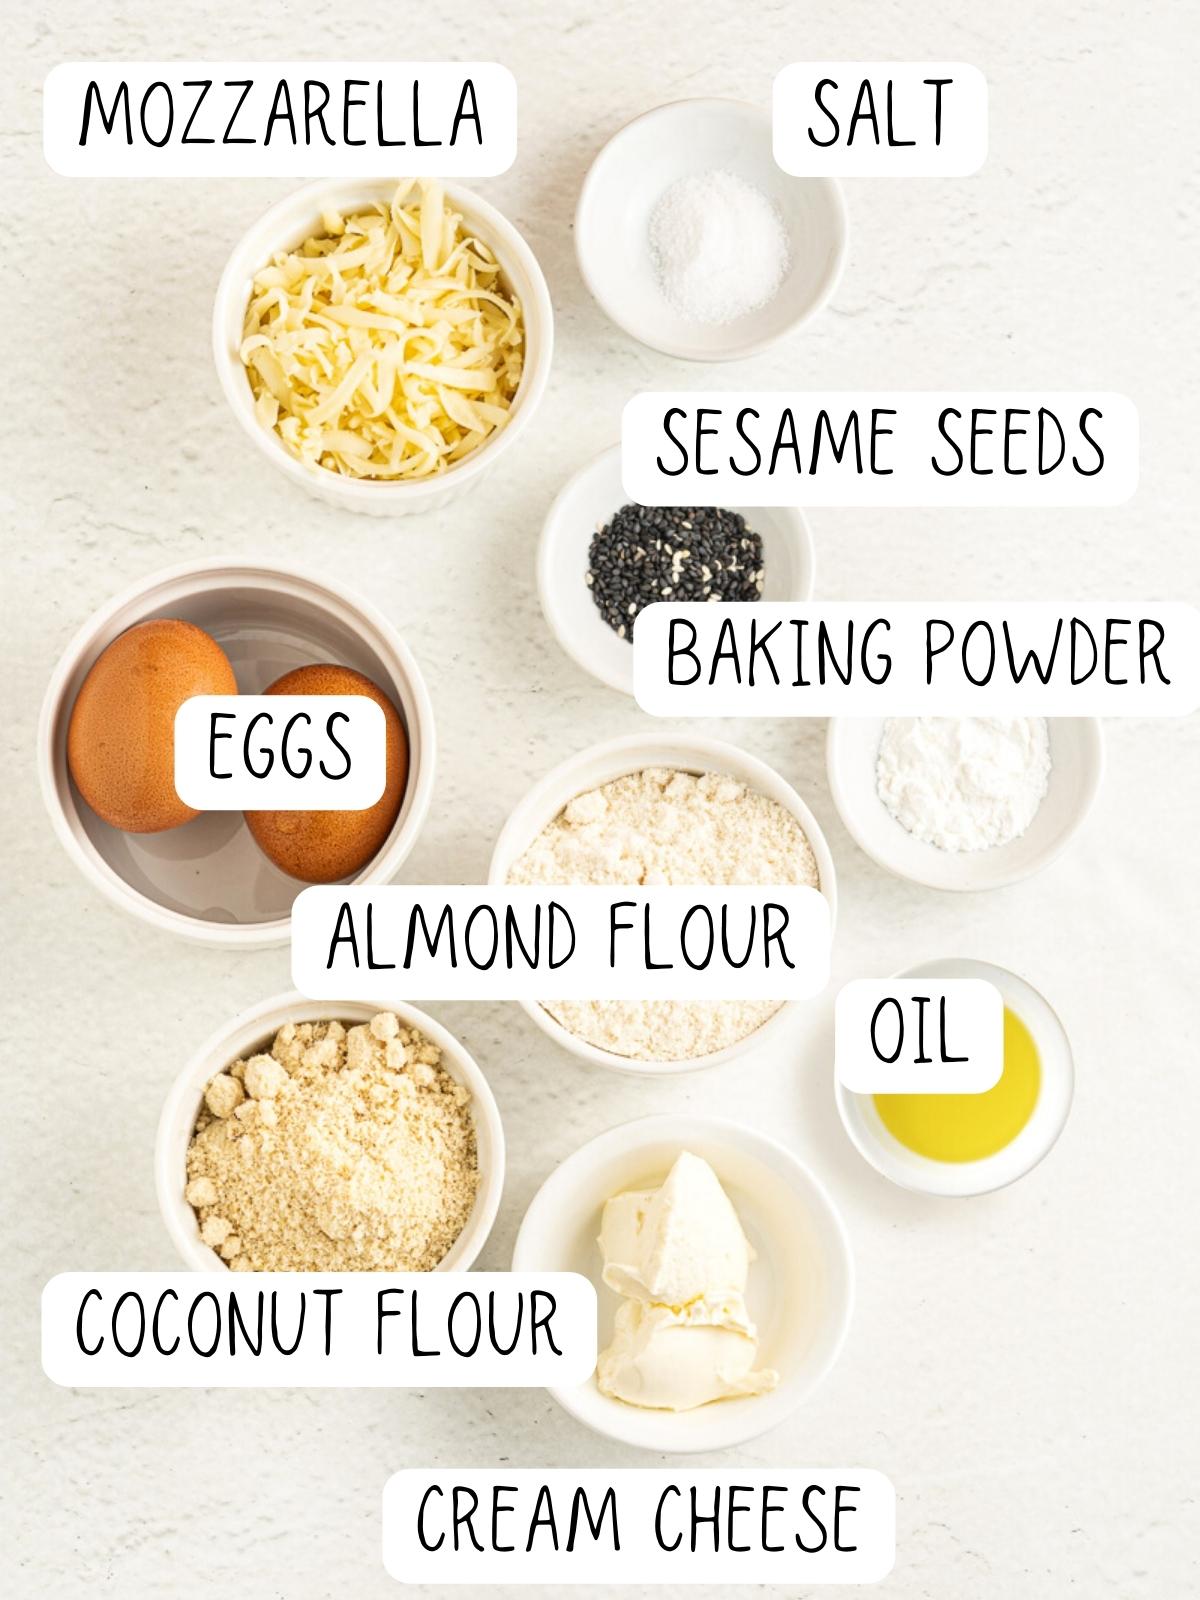 ingredients for keto rolls, including mozzarella cheese, eggs, salts, sesame seeds, baking powder, almond flour, oil, coconut flour and cream cheese